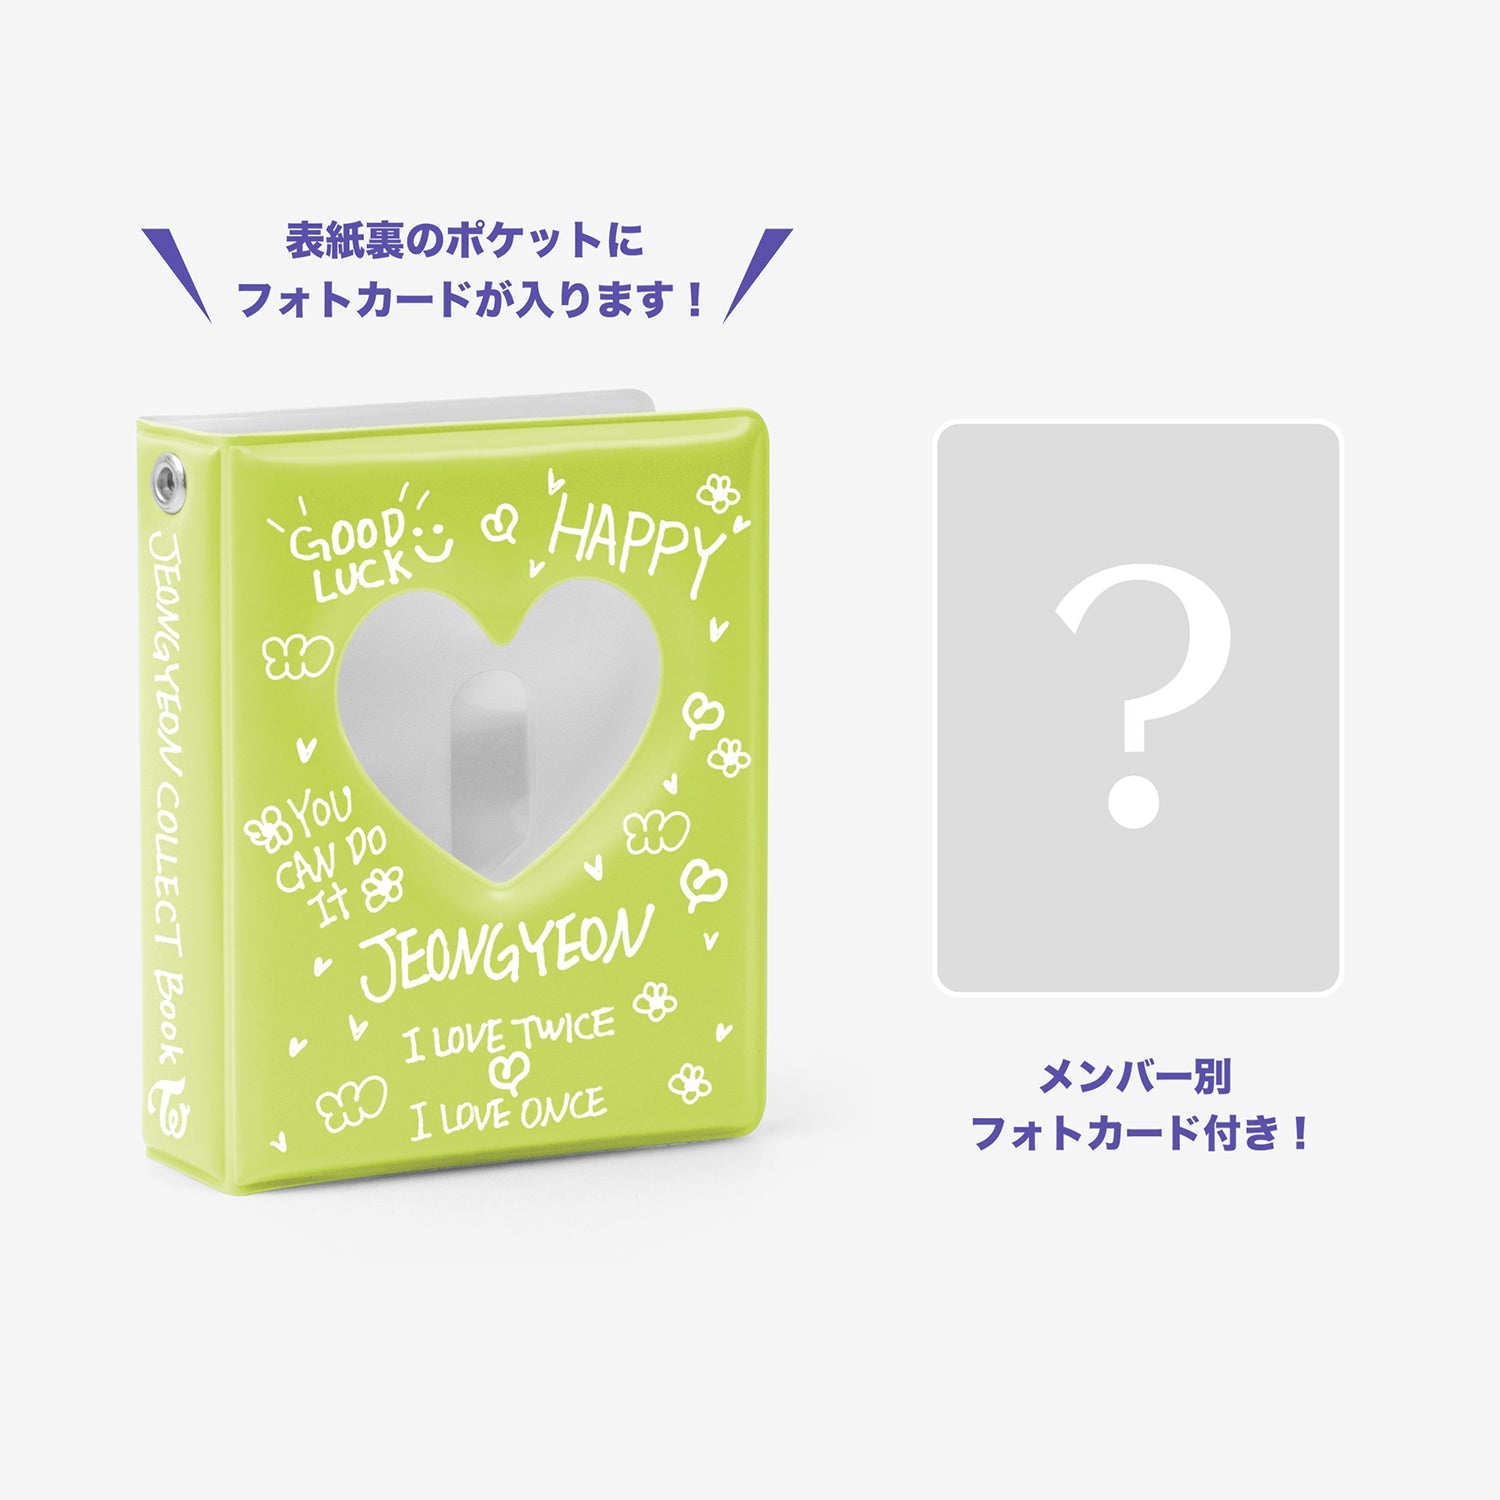 COLLECT BOOK Designed by JEONGYEON / TWICE『JAPAN DEBUT 7th Anniversary』